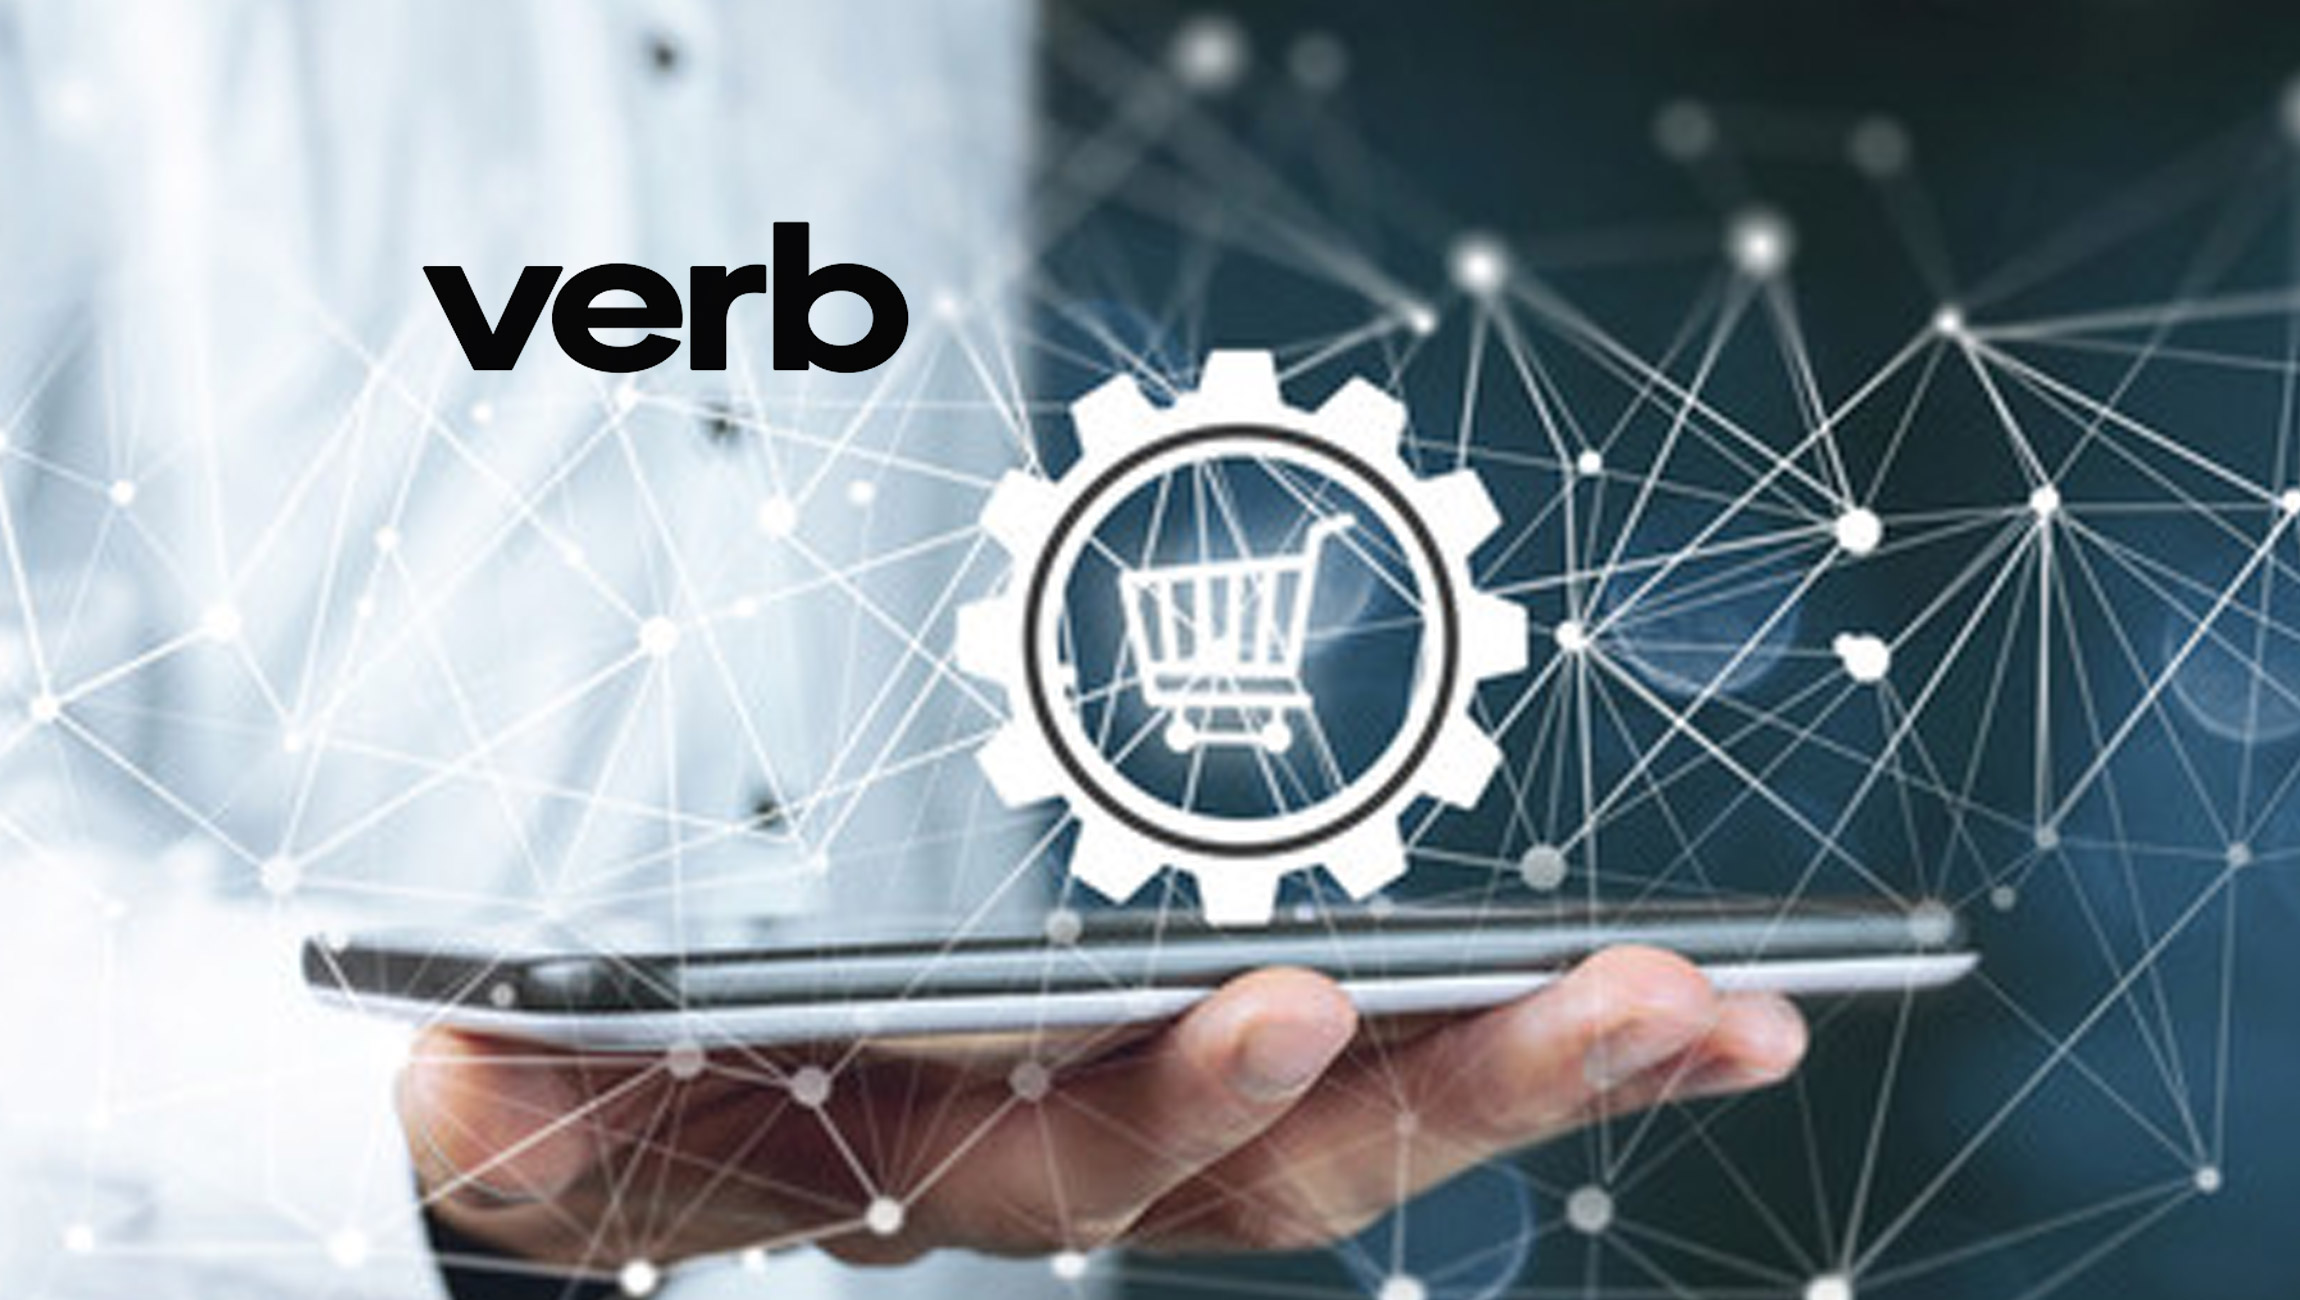 VERB’s MARKET Platform Now Supports Secure Sales of NFTs Built on Blockchain Technology Through Livestream Shopping Events